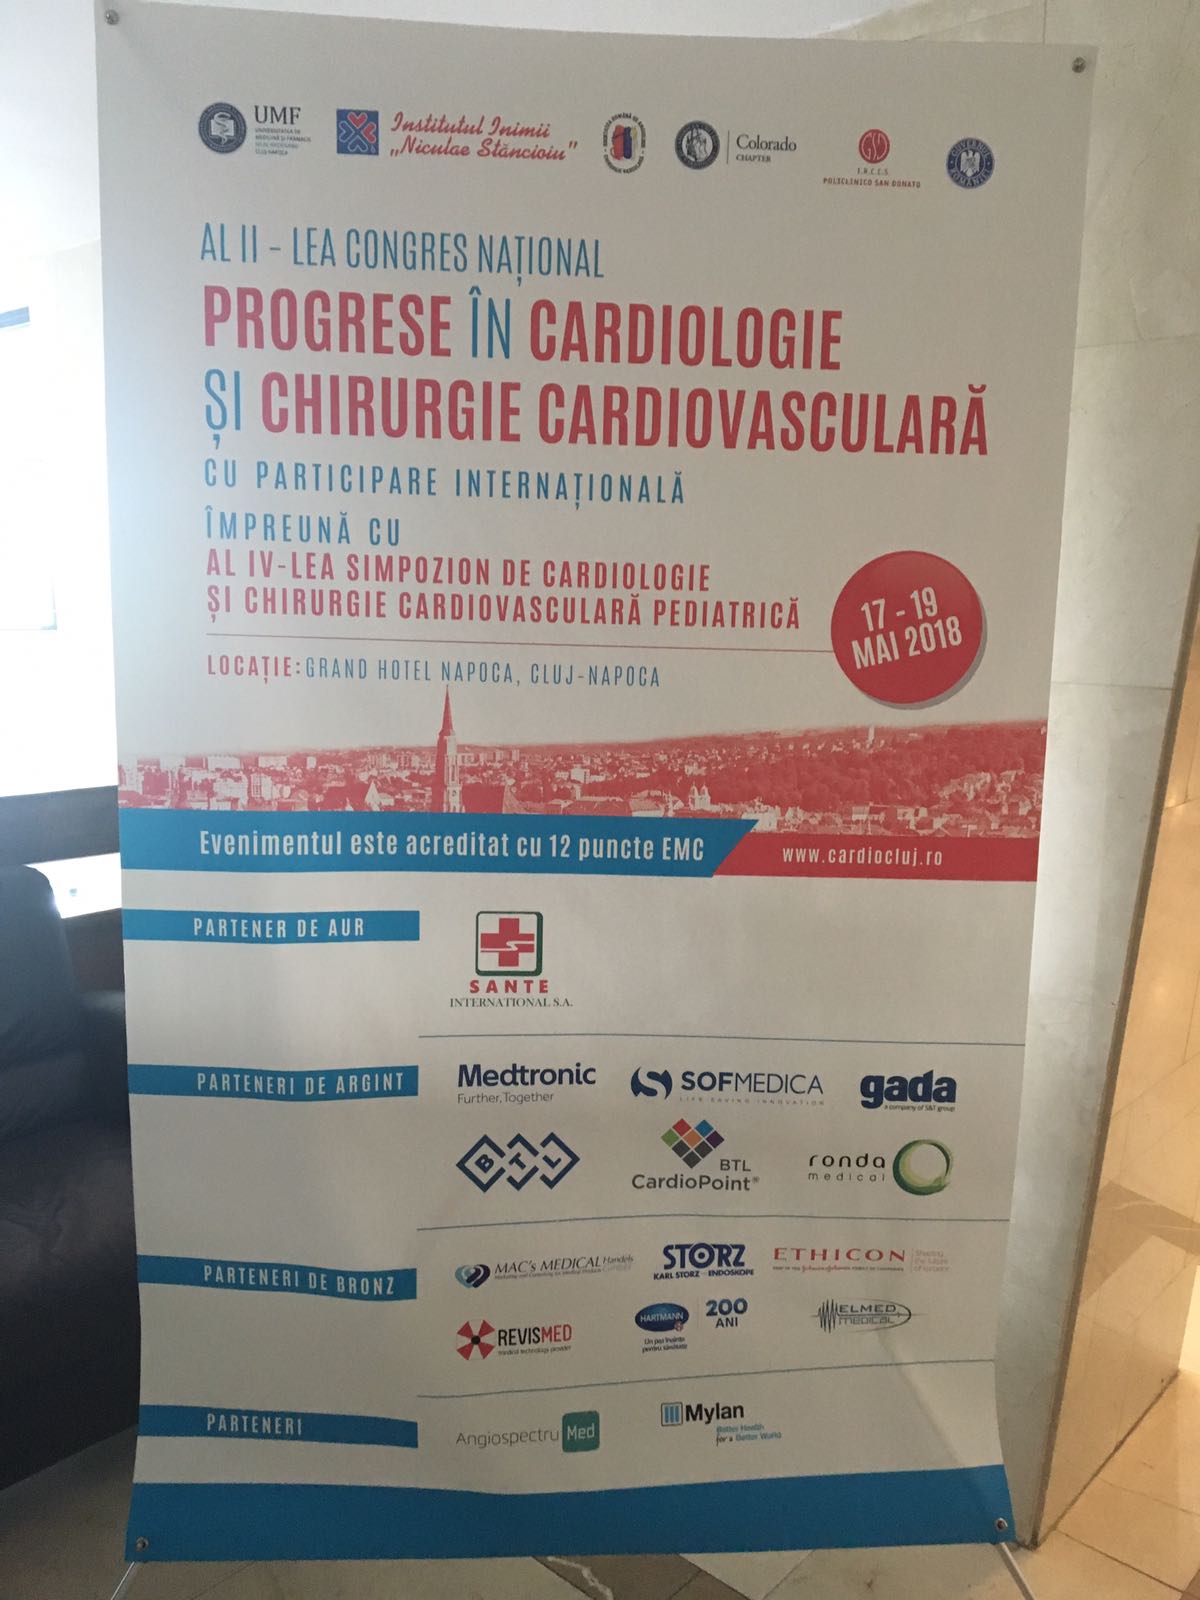 The 2nd National Congress "Progress in Cardiology and Cardiovascular Surgery"